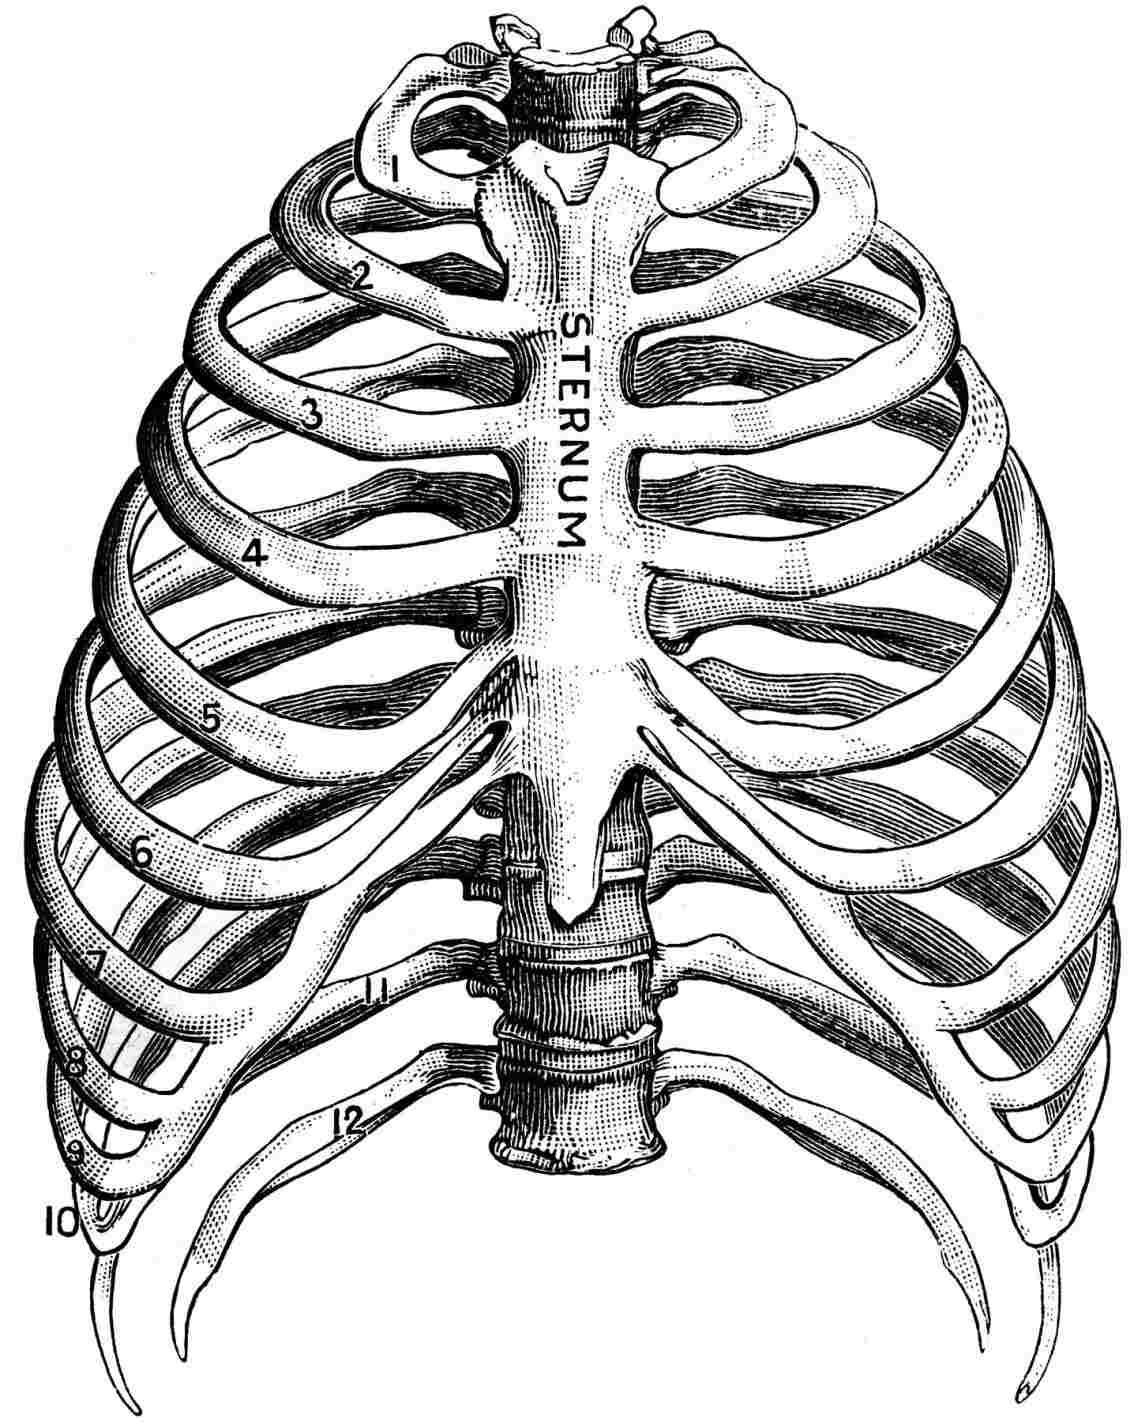 Rib Cage Anatomy THORACIC SPINE ANATOMY / The rib cage, shaped in a